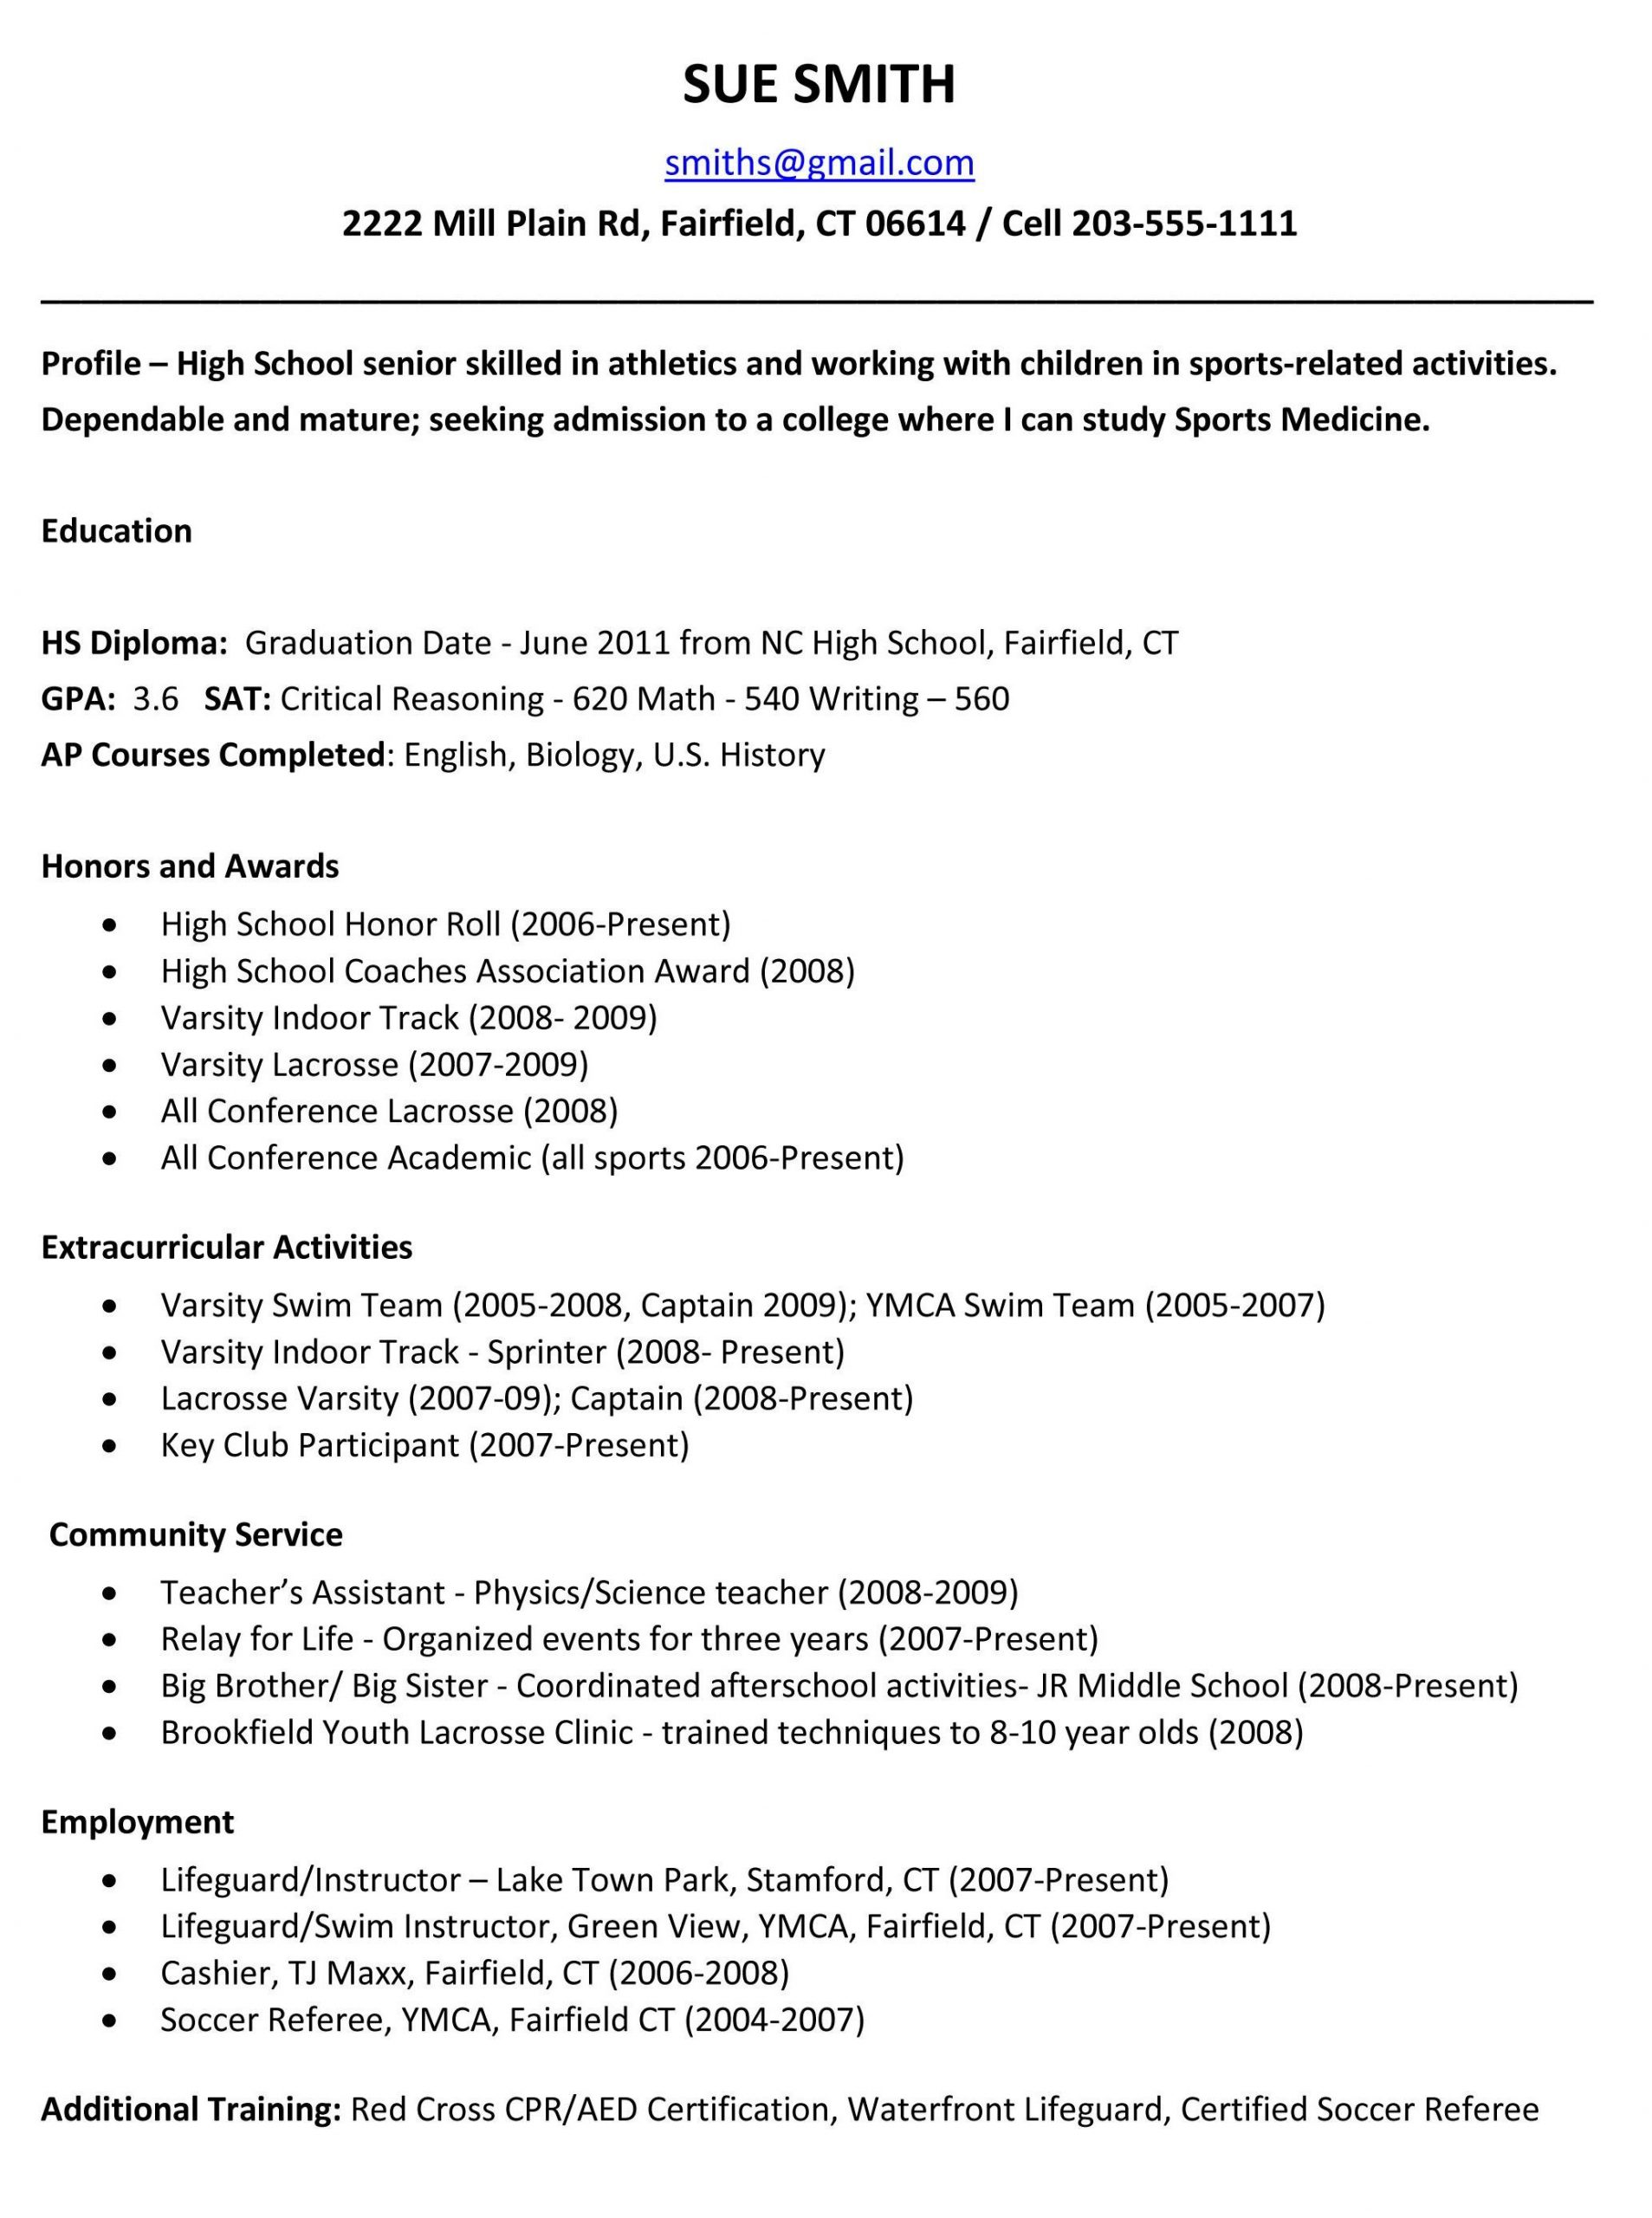 Sample Student Resume for College Application Sample High School Resume for College App – High School Resume …